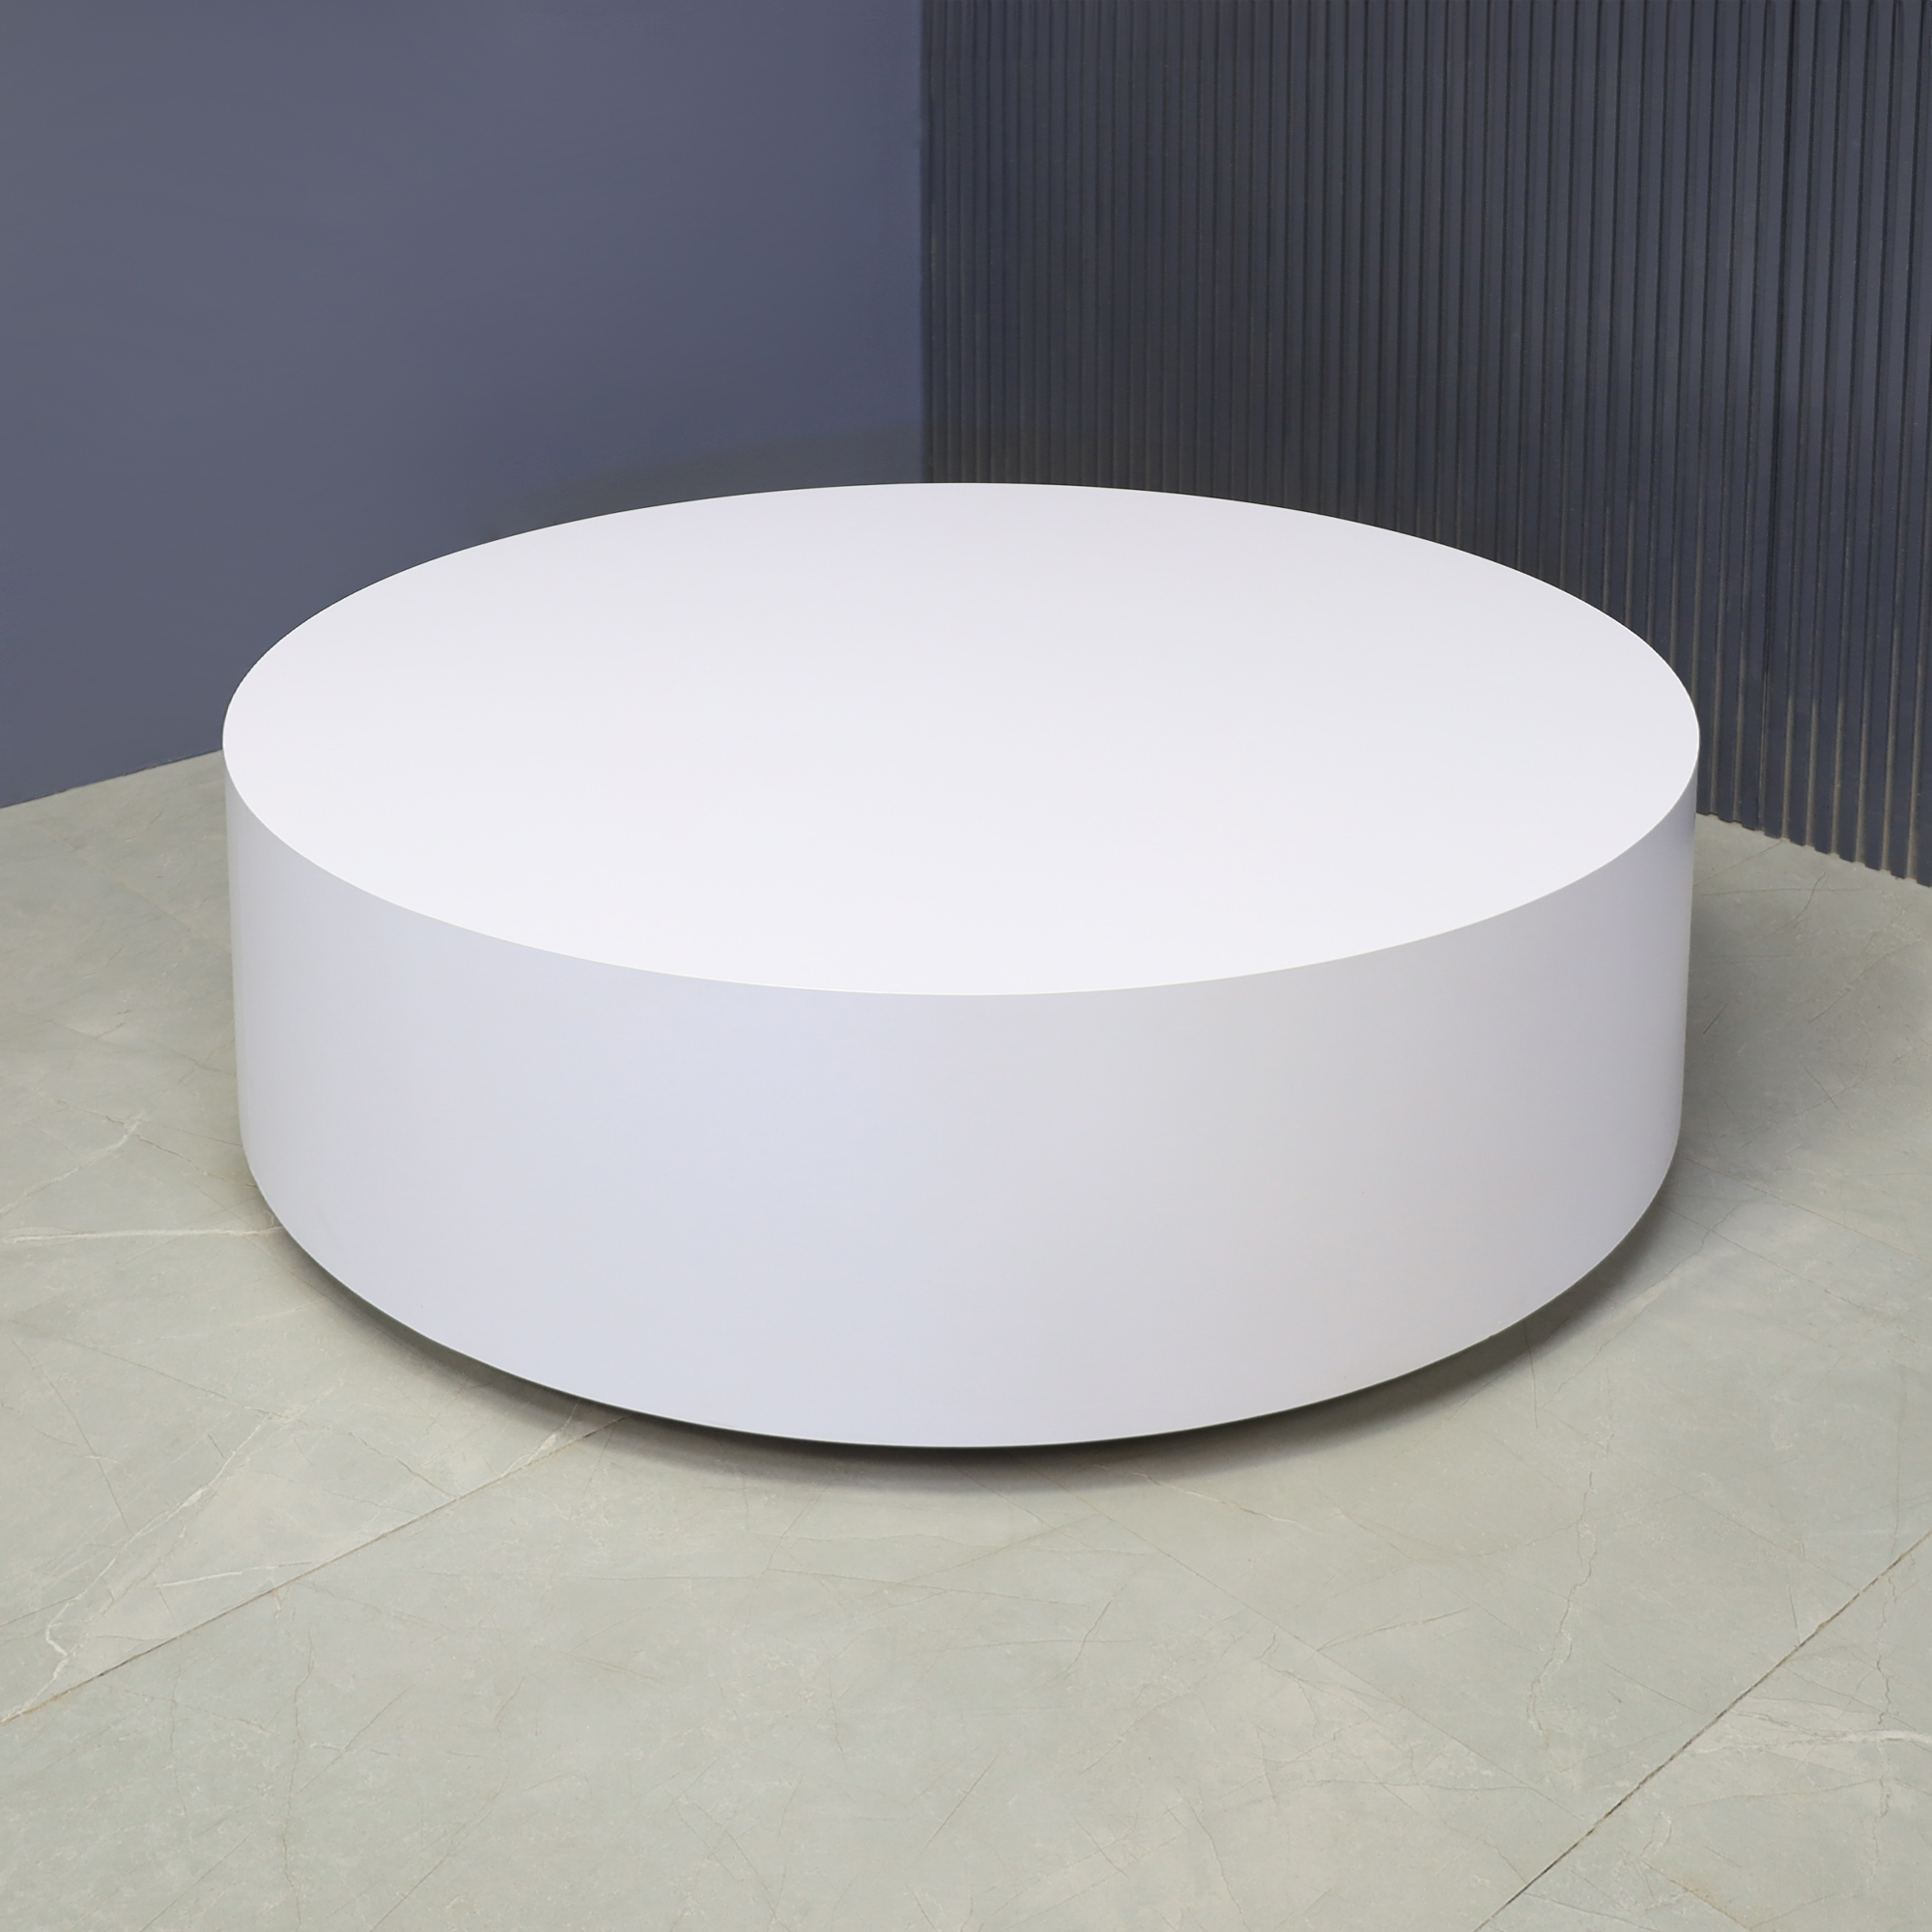 42-inch Norfolk Round Lobby Table in white matte laminate table and brushed aluminum laminate toe-kick, shown here.